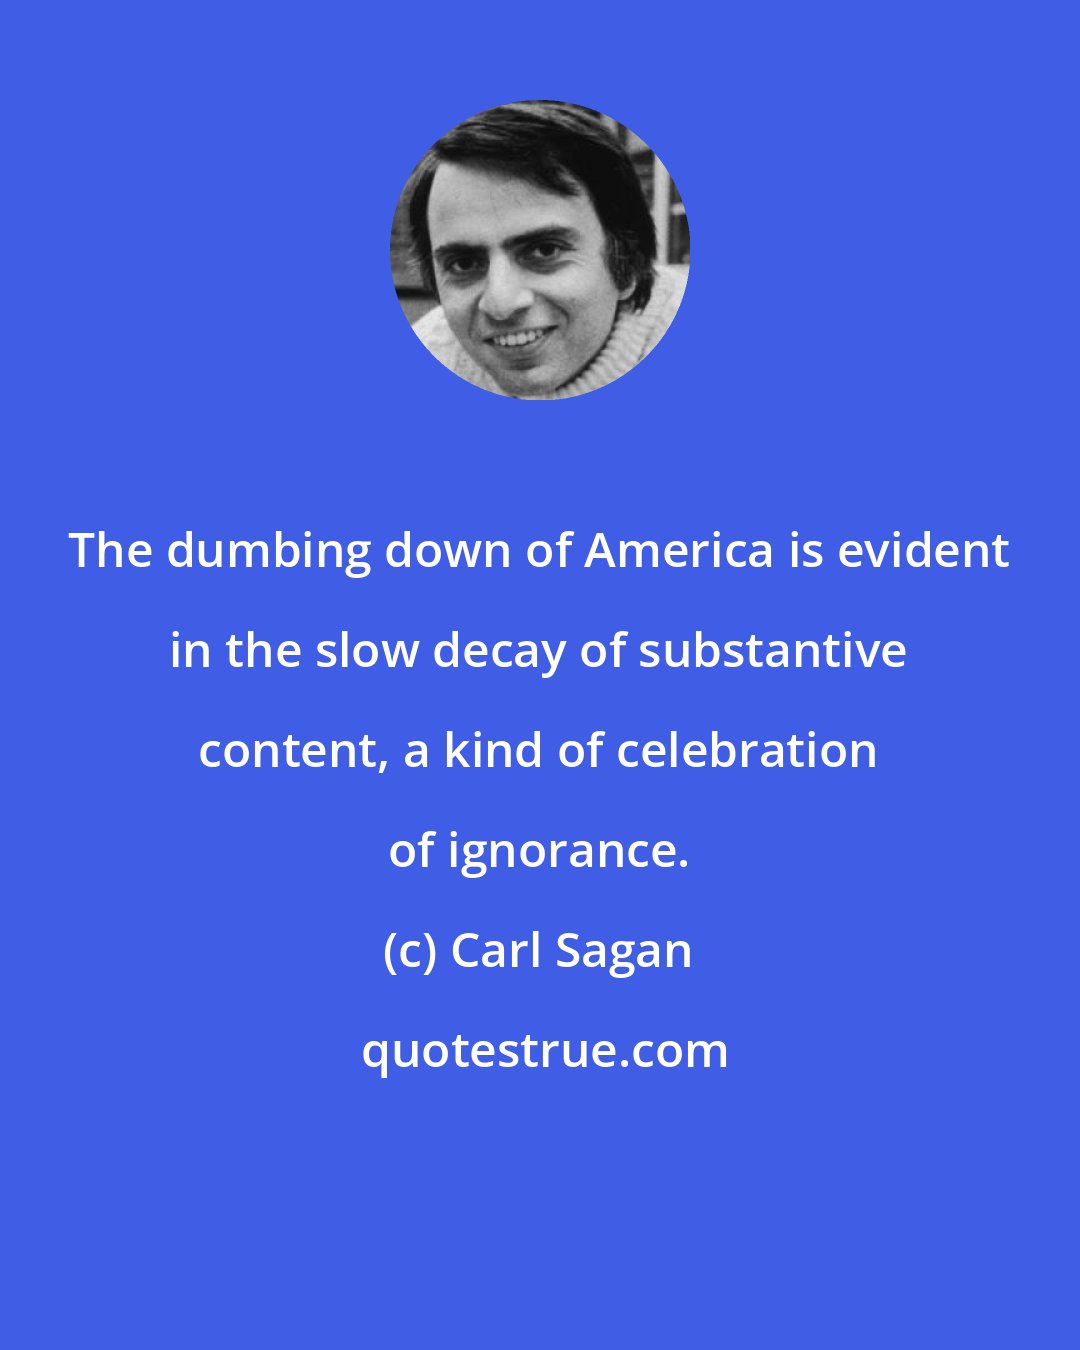 Carl Sagan: The dumbing down of America is evident in the slow decay of substantive content, a kind of celebration of ignorance.